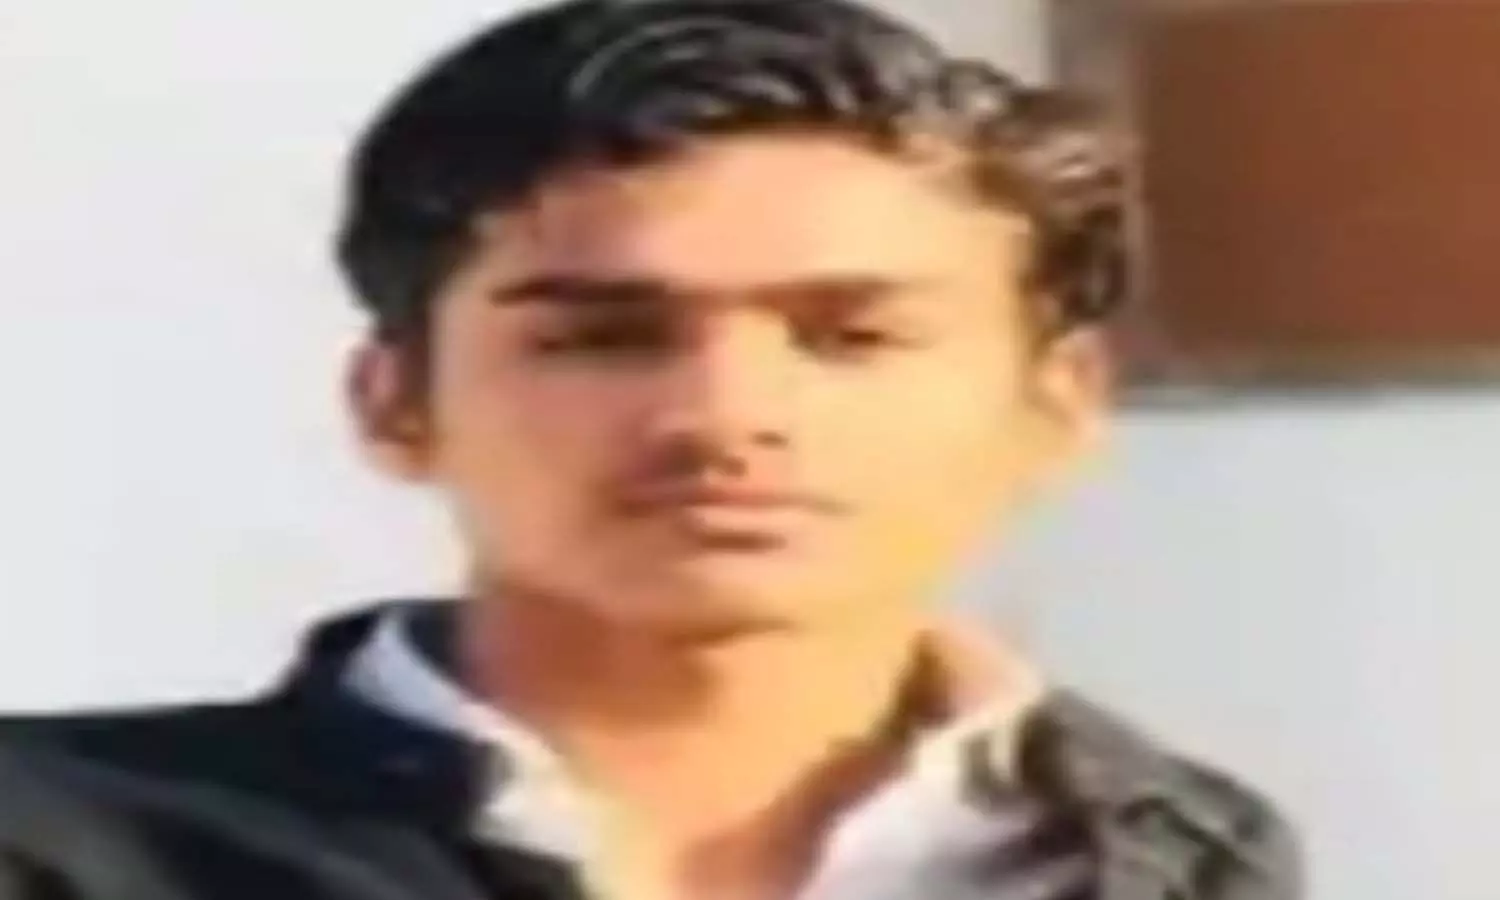 Chaudhary Charan Singh University student stabbed to death in Meerut